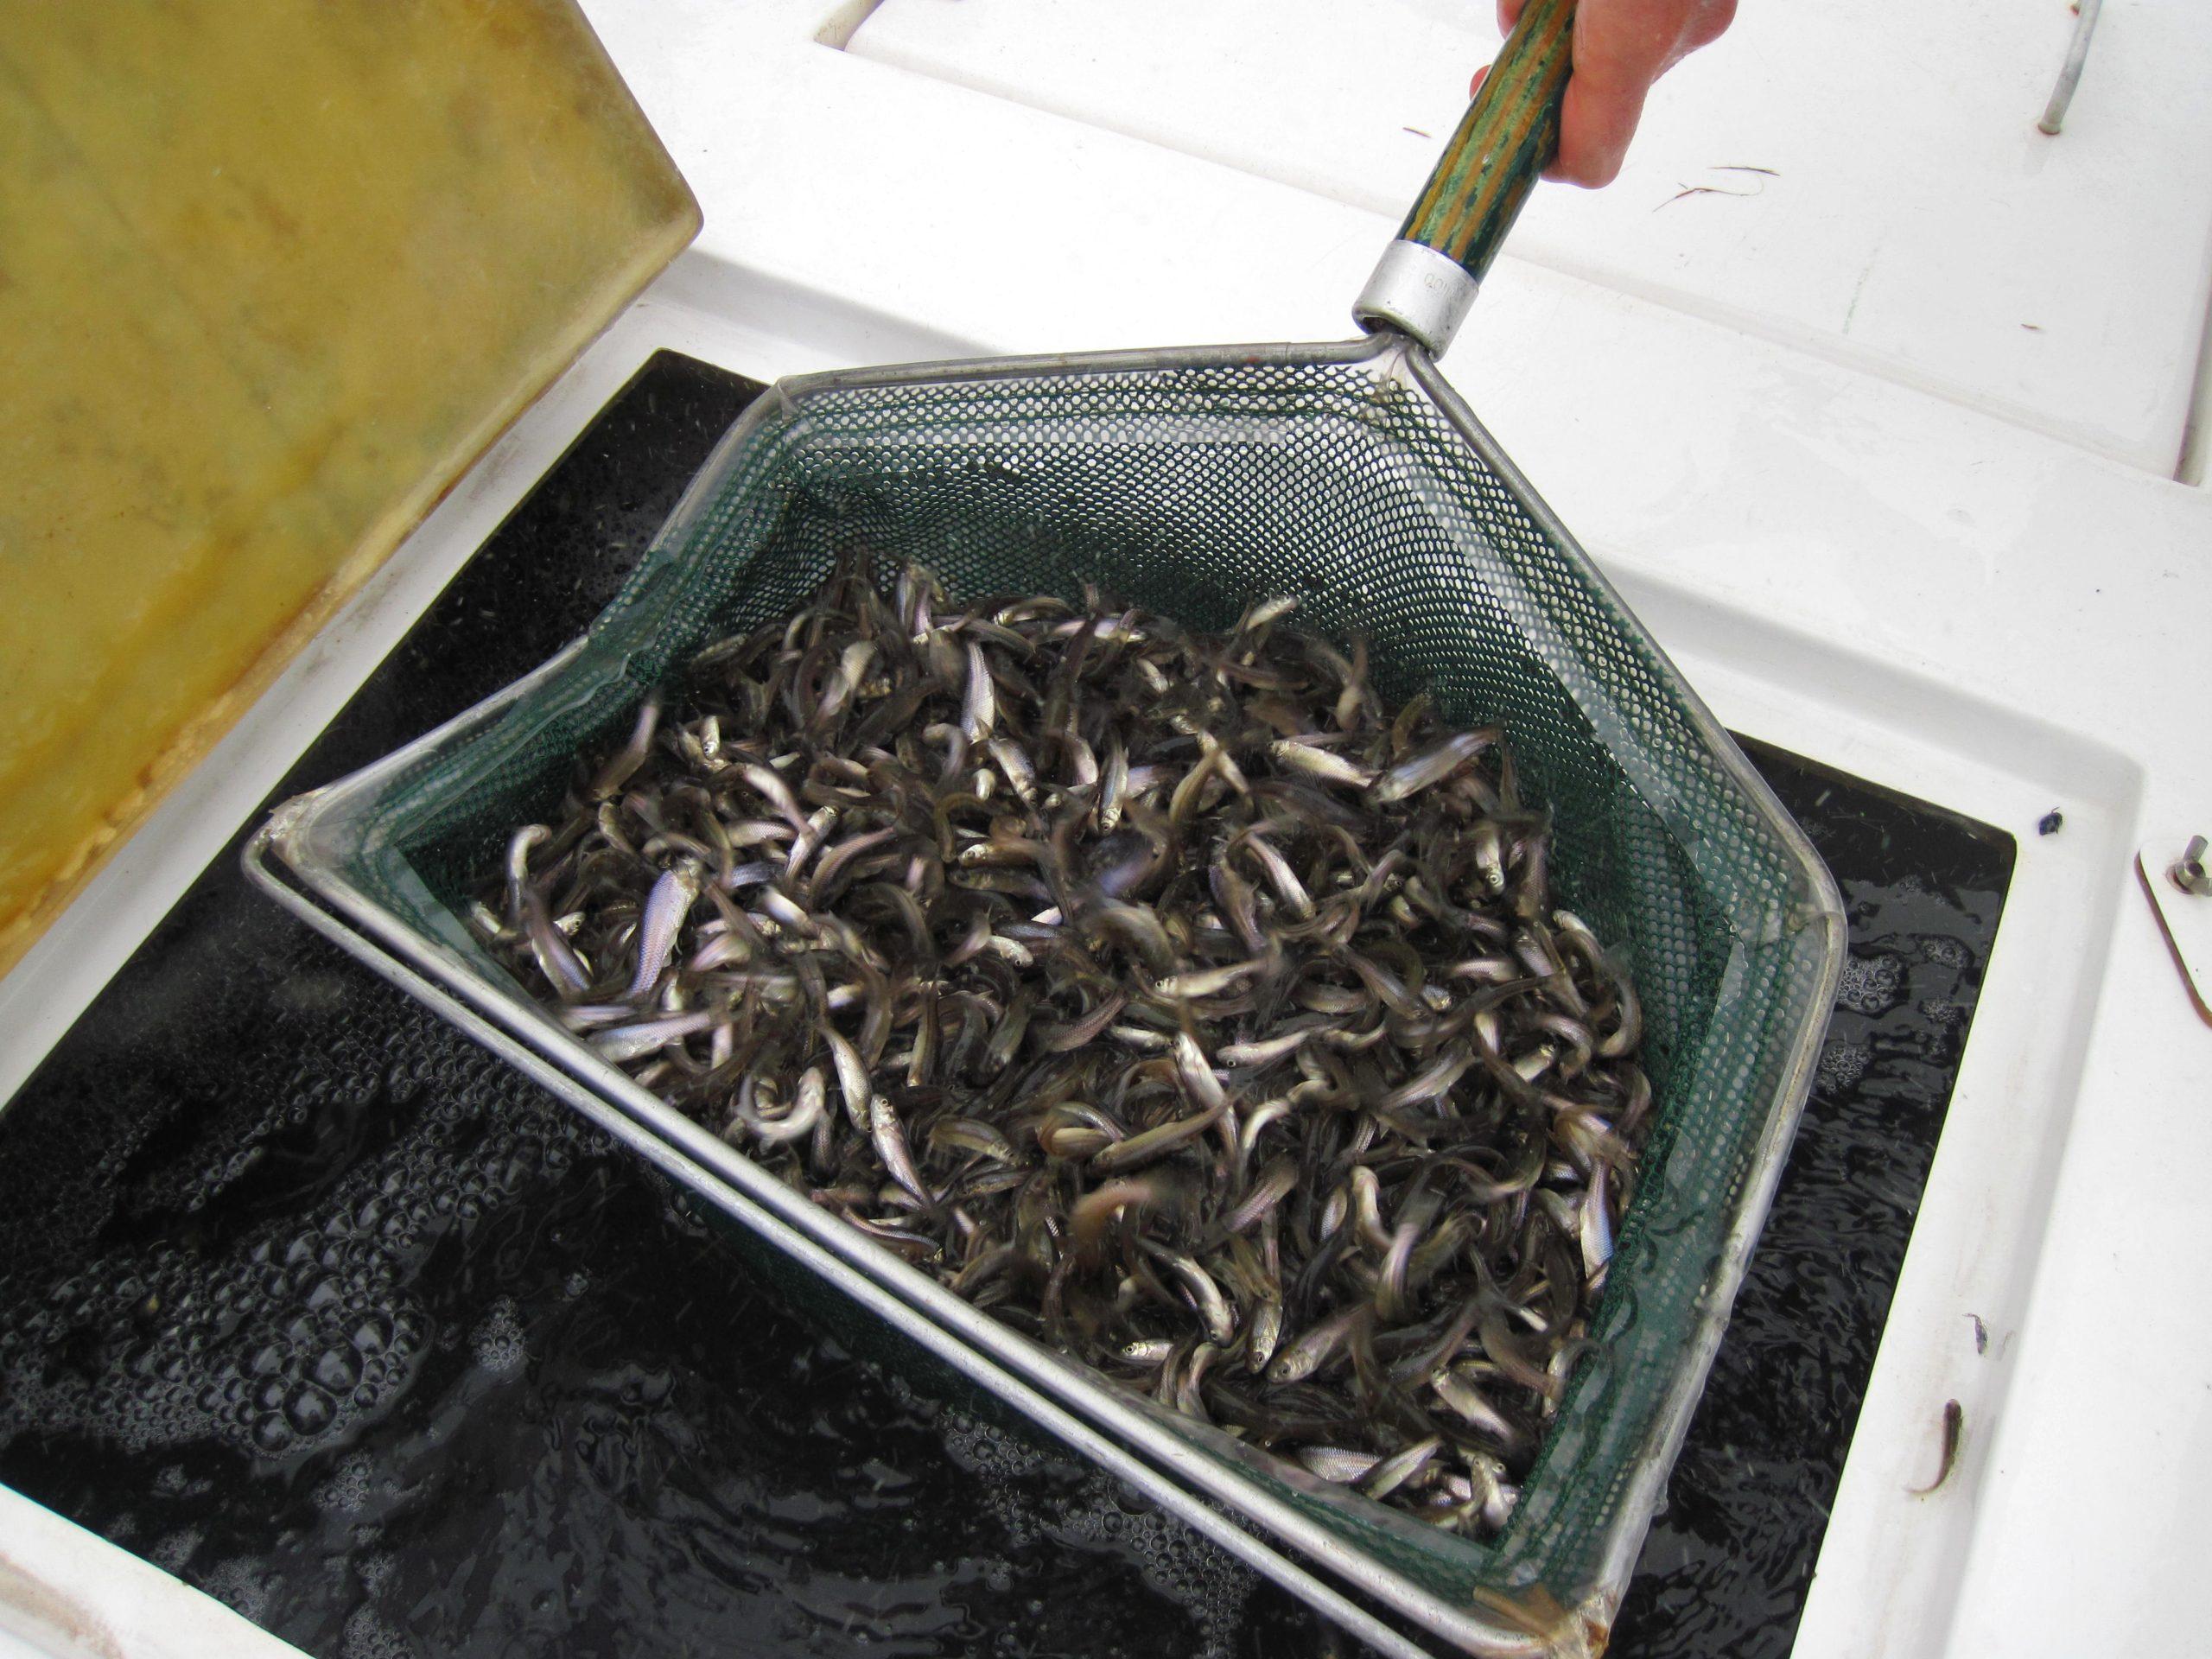 Spring Fish Stocking: Bluegill, Fathead Minnows, Golden Shiners, and Shad